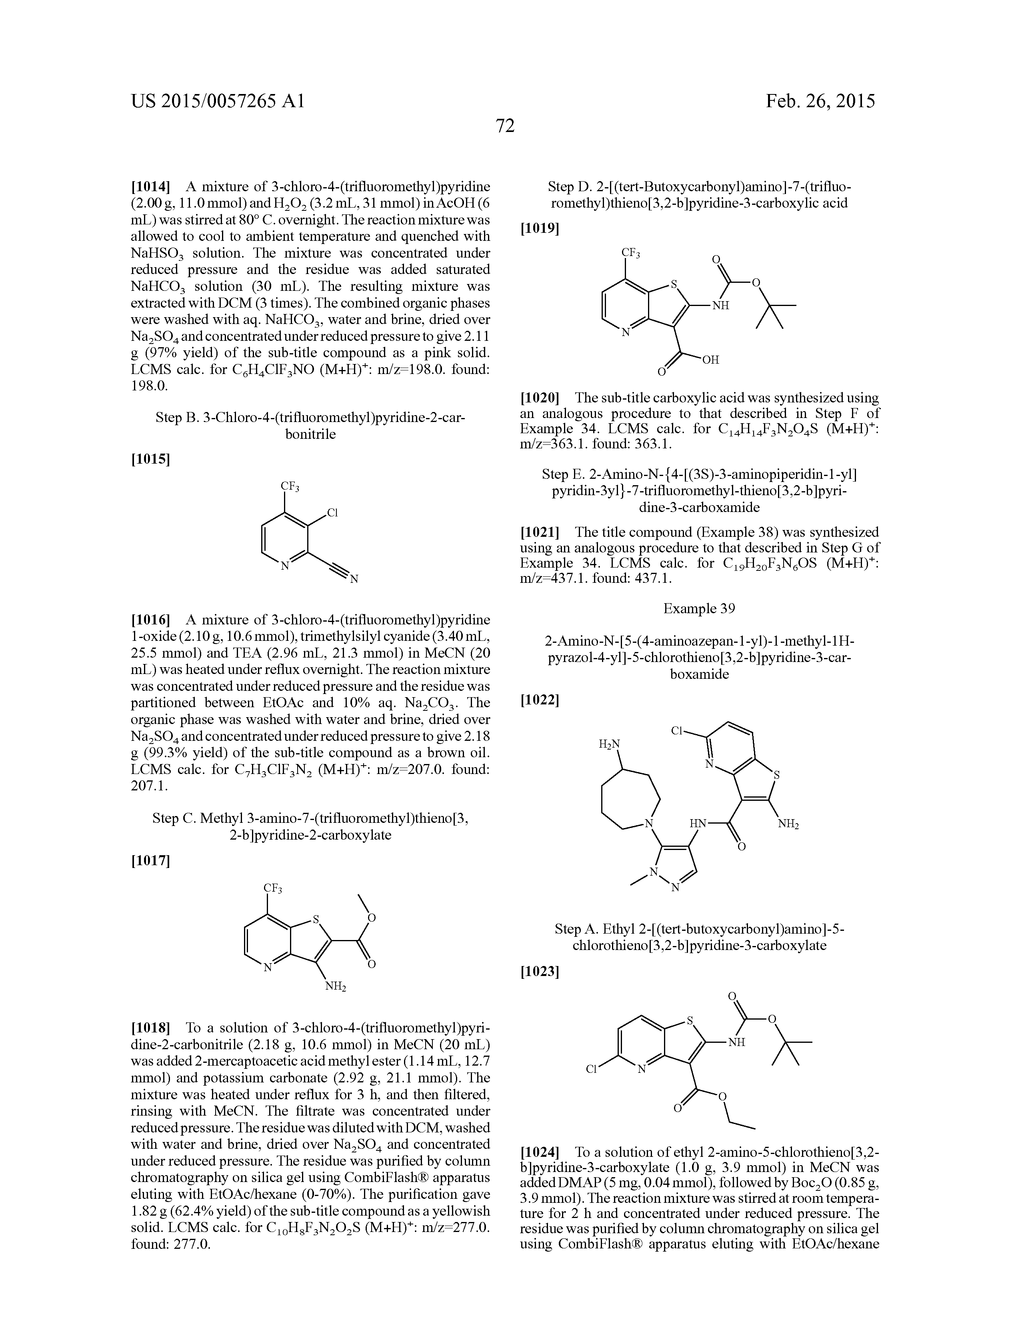 FURO- AND THIENO-PYRIDINE CARBOXAMIDE COMPOUNDS USEFUL AS PIM KINASE     INHIBITORS - diagram, schematic, and image 73